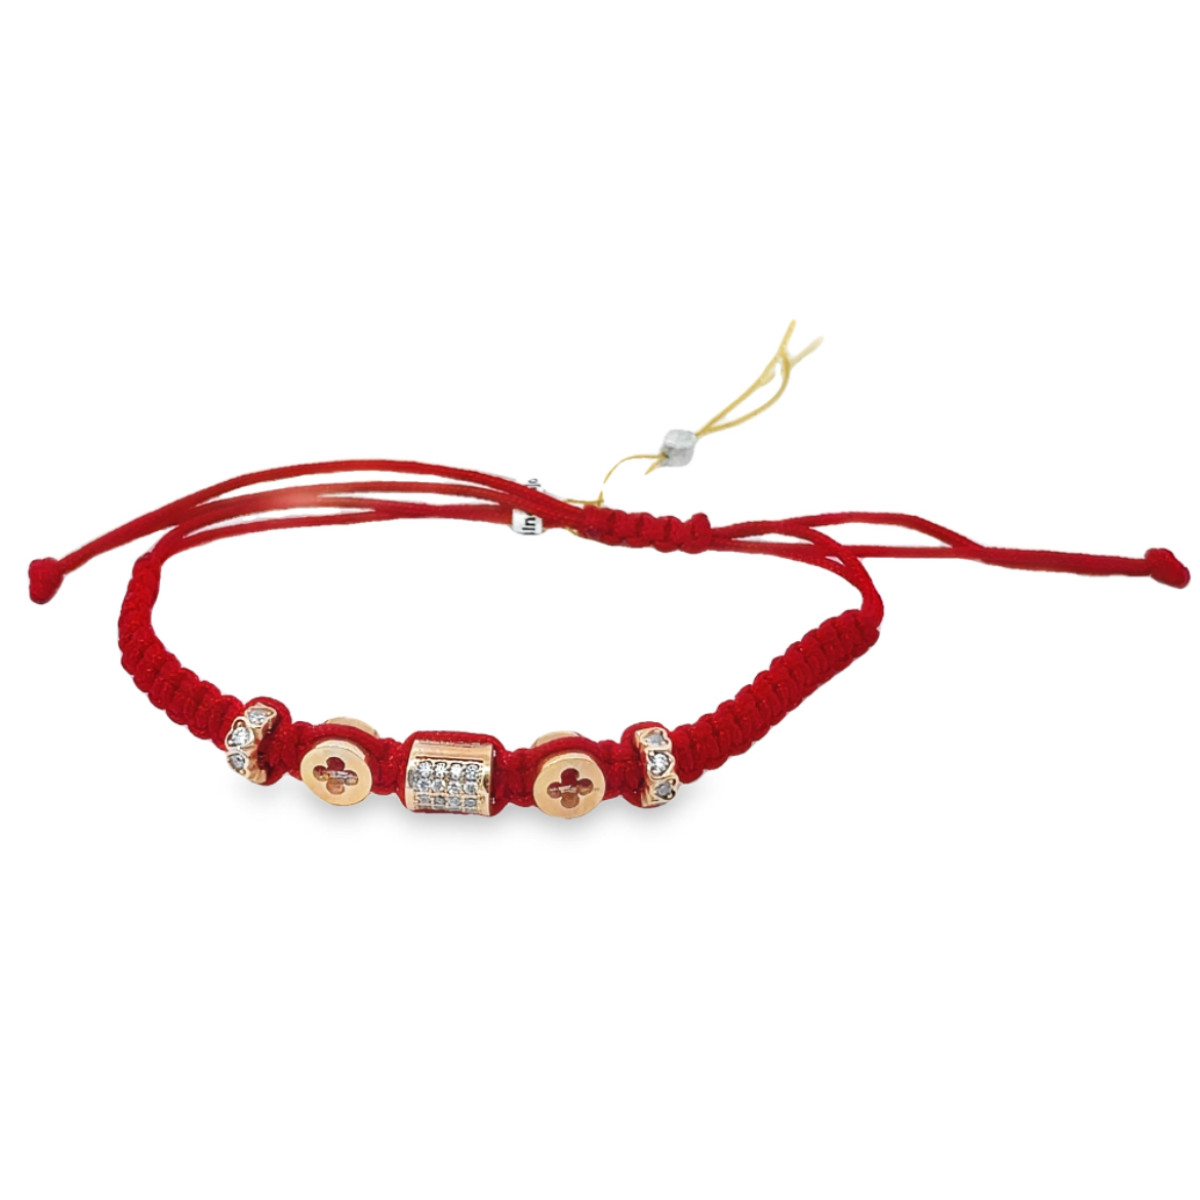  The red thread bracelet is decorated with gold details and zircon eyelets